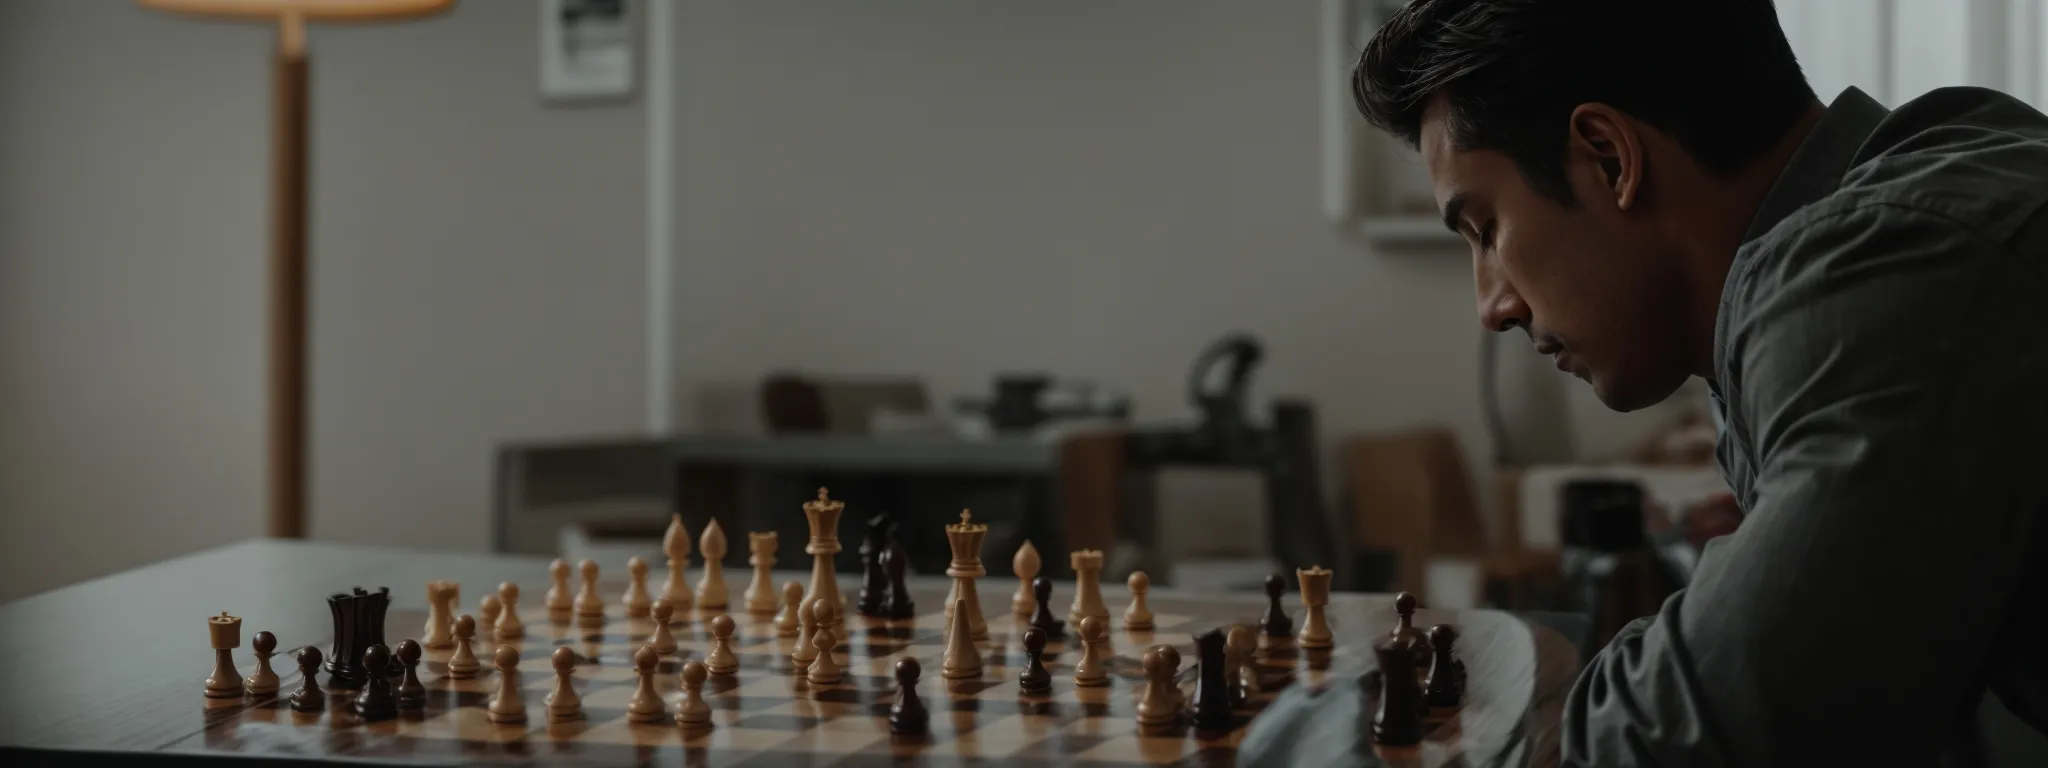 a chessboard with one player contemplating a move, symbolizing strategic planning and decision-making.